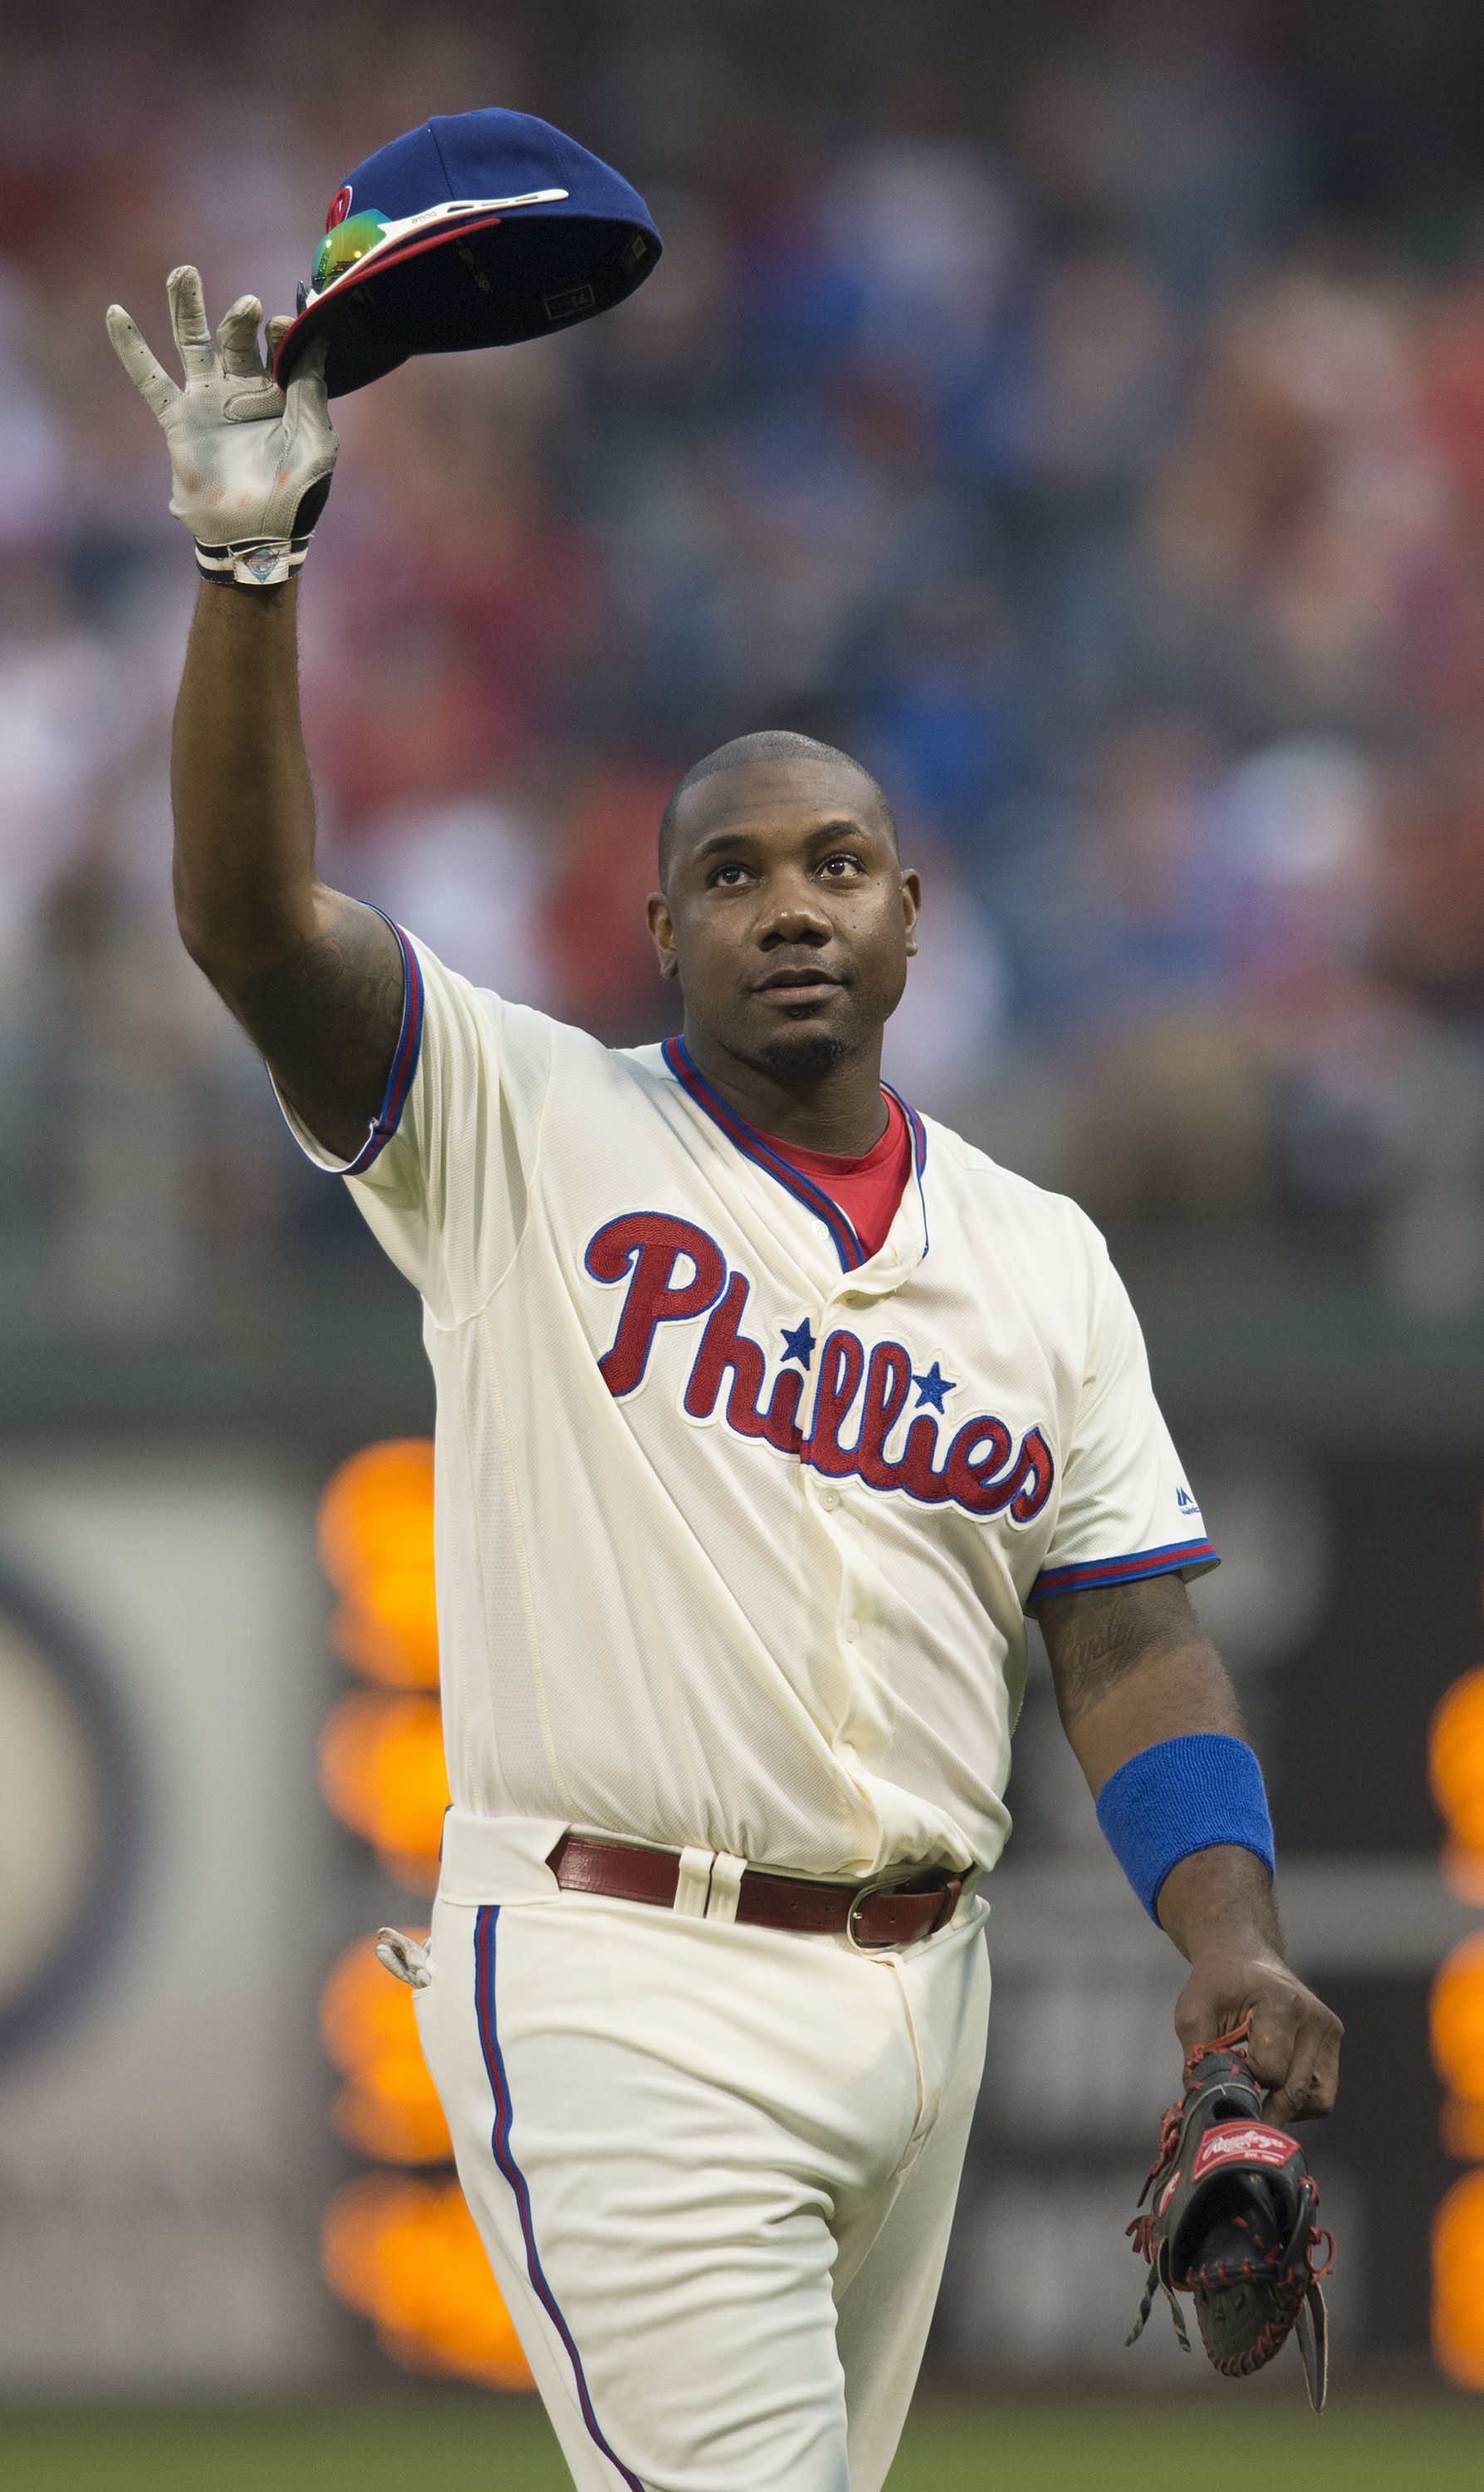 Philadelphia Phillies' Ryan Howard acknowledges the cheers of the fans as he is removed from the game in the ninth inning to a standing ovation on Sunday, Oct. 2, 2016 at Citizens Bank Park in Philadelphia, Pa. (Clem Murray/Philadelphia Inquirer/TNS)